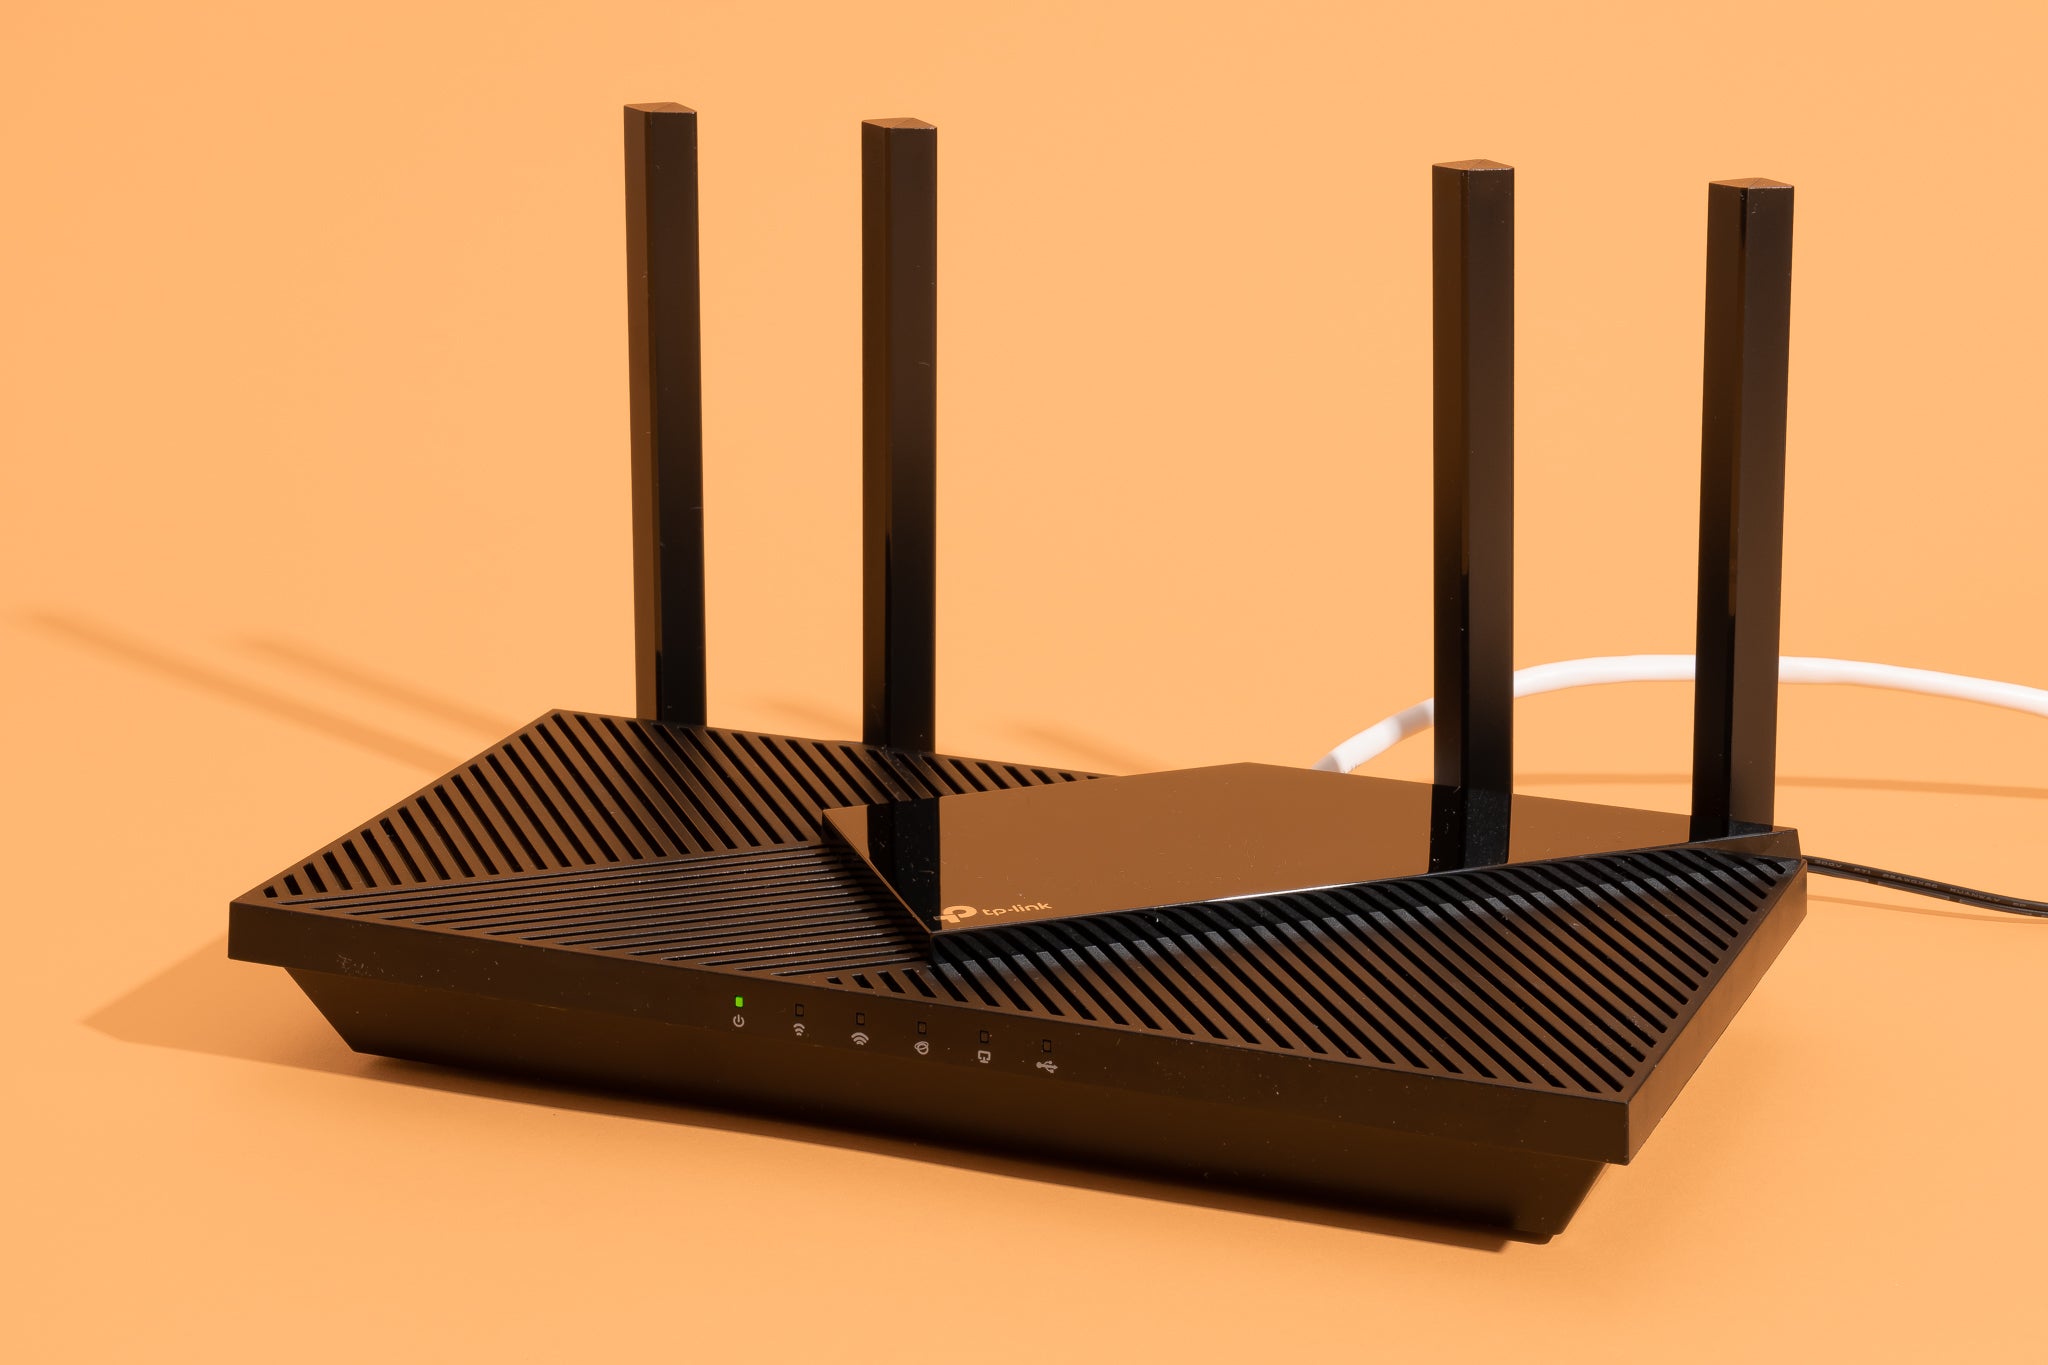 What are the disadvantages of TP-Link?
